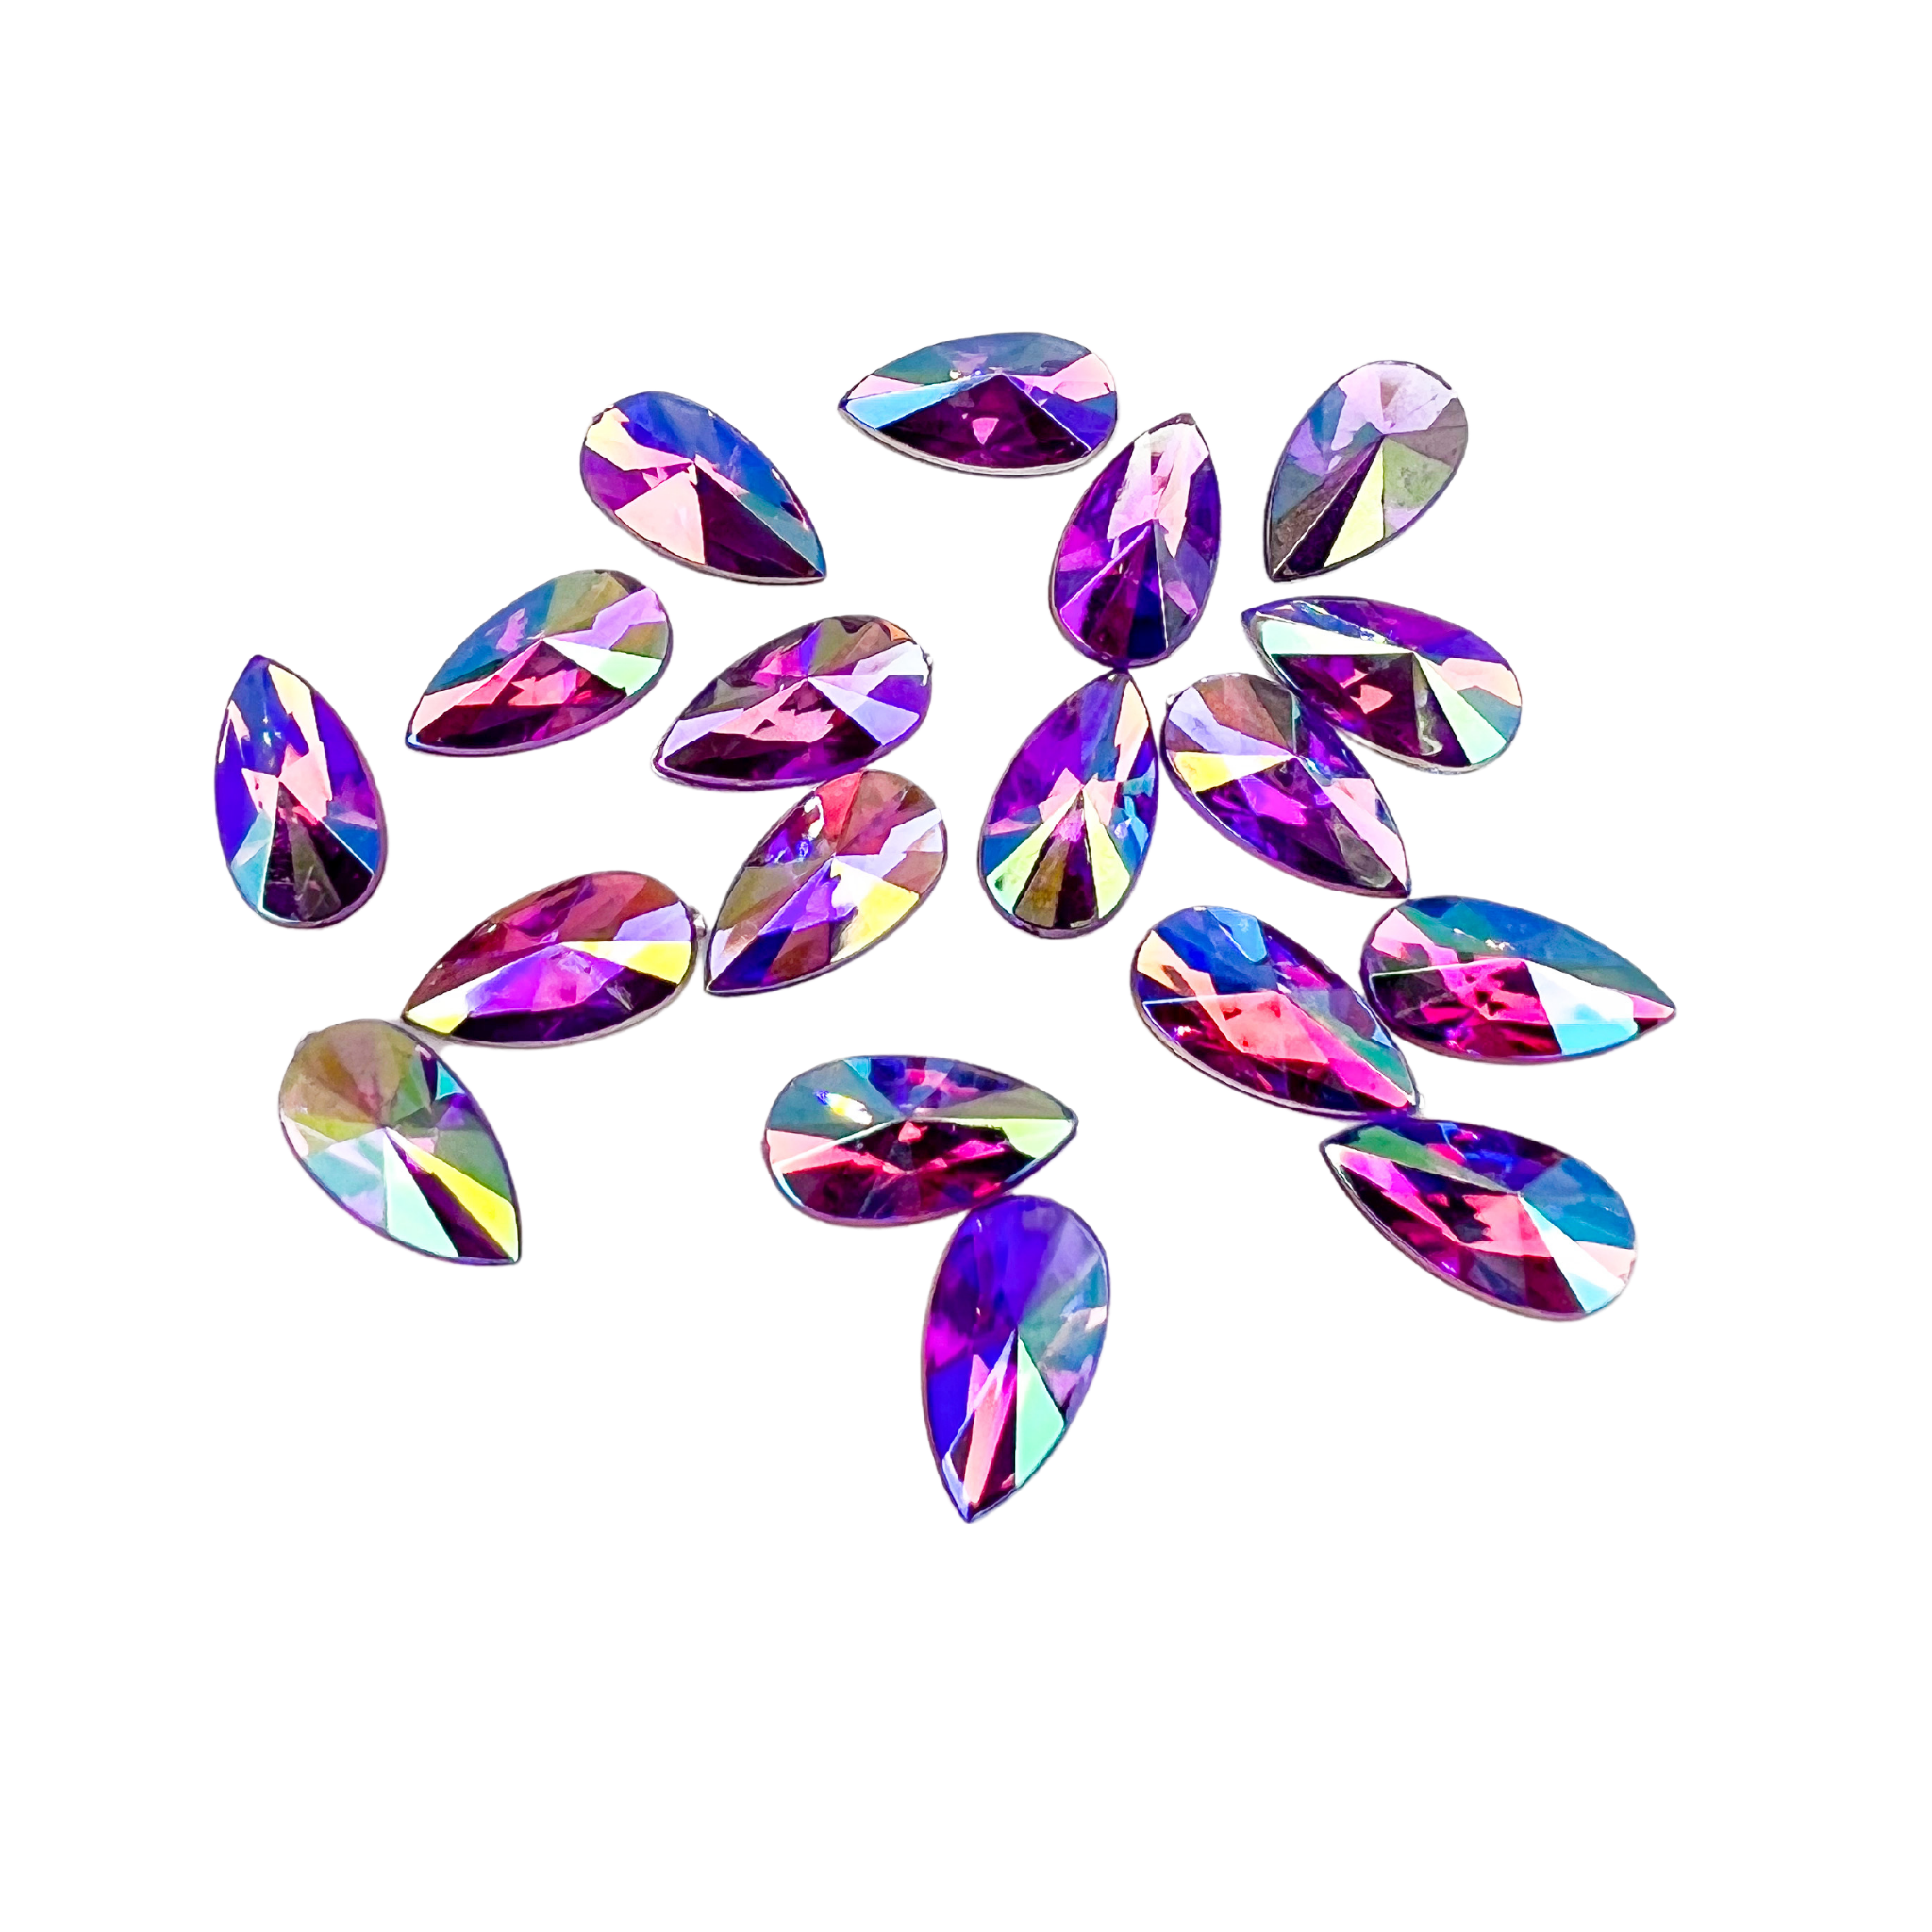 Purple face and body gems in a teardrop shape for your face and body